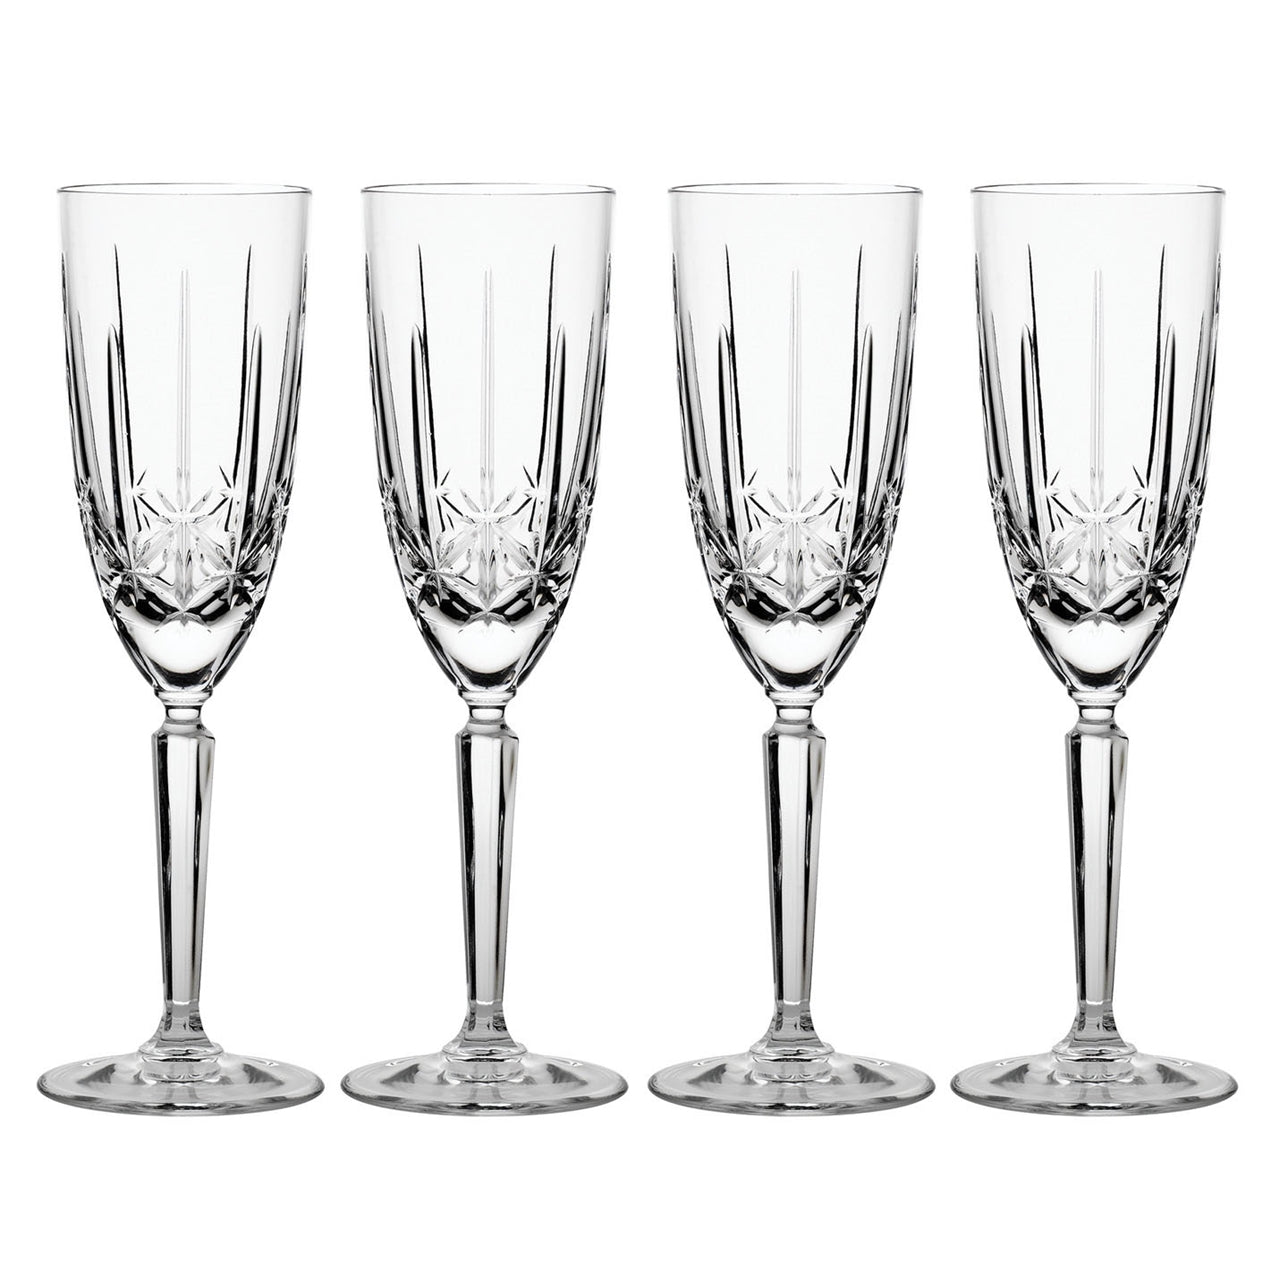 Waterford Marquis Sparkle Flutes Set of 4  Brisk and modern, the Sparkle pattern by Waterford is characterized by brilliant crystal cuts reminiscent of delicate starlight. A New Year's Eve toast would be resplendent in these stunning Flutes : perfect for serving champagne, spumante and other sparkling wines.